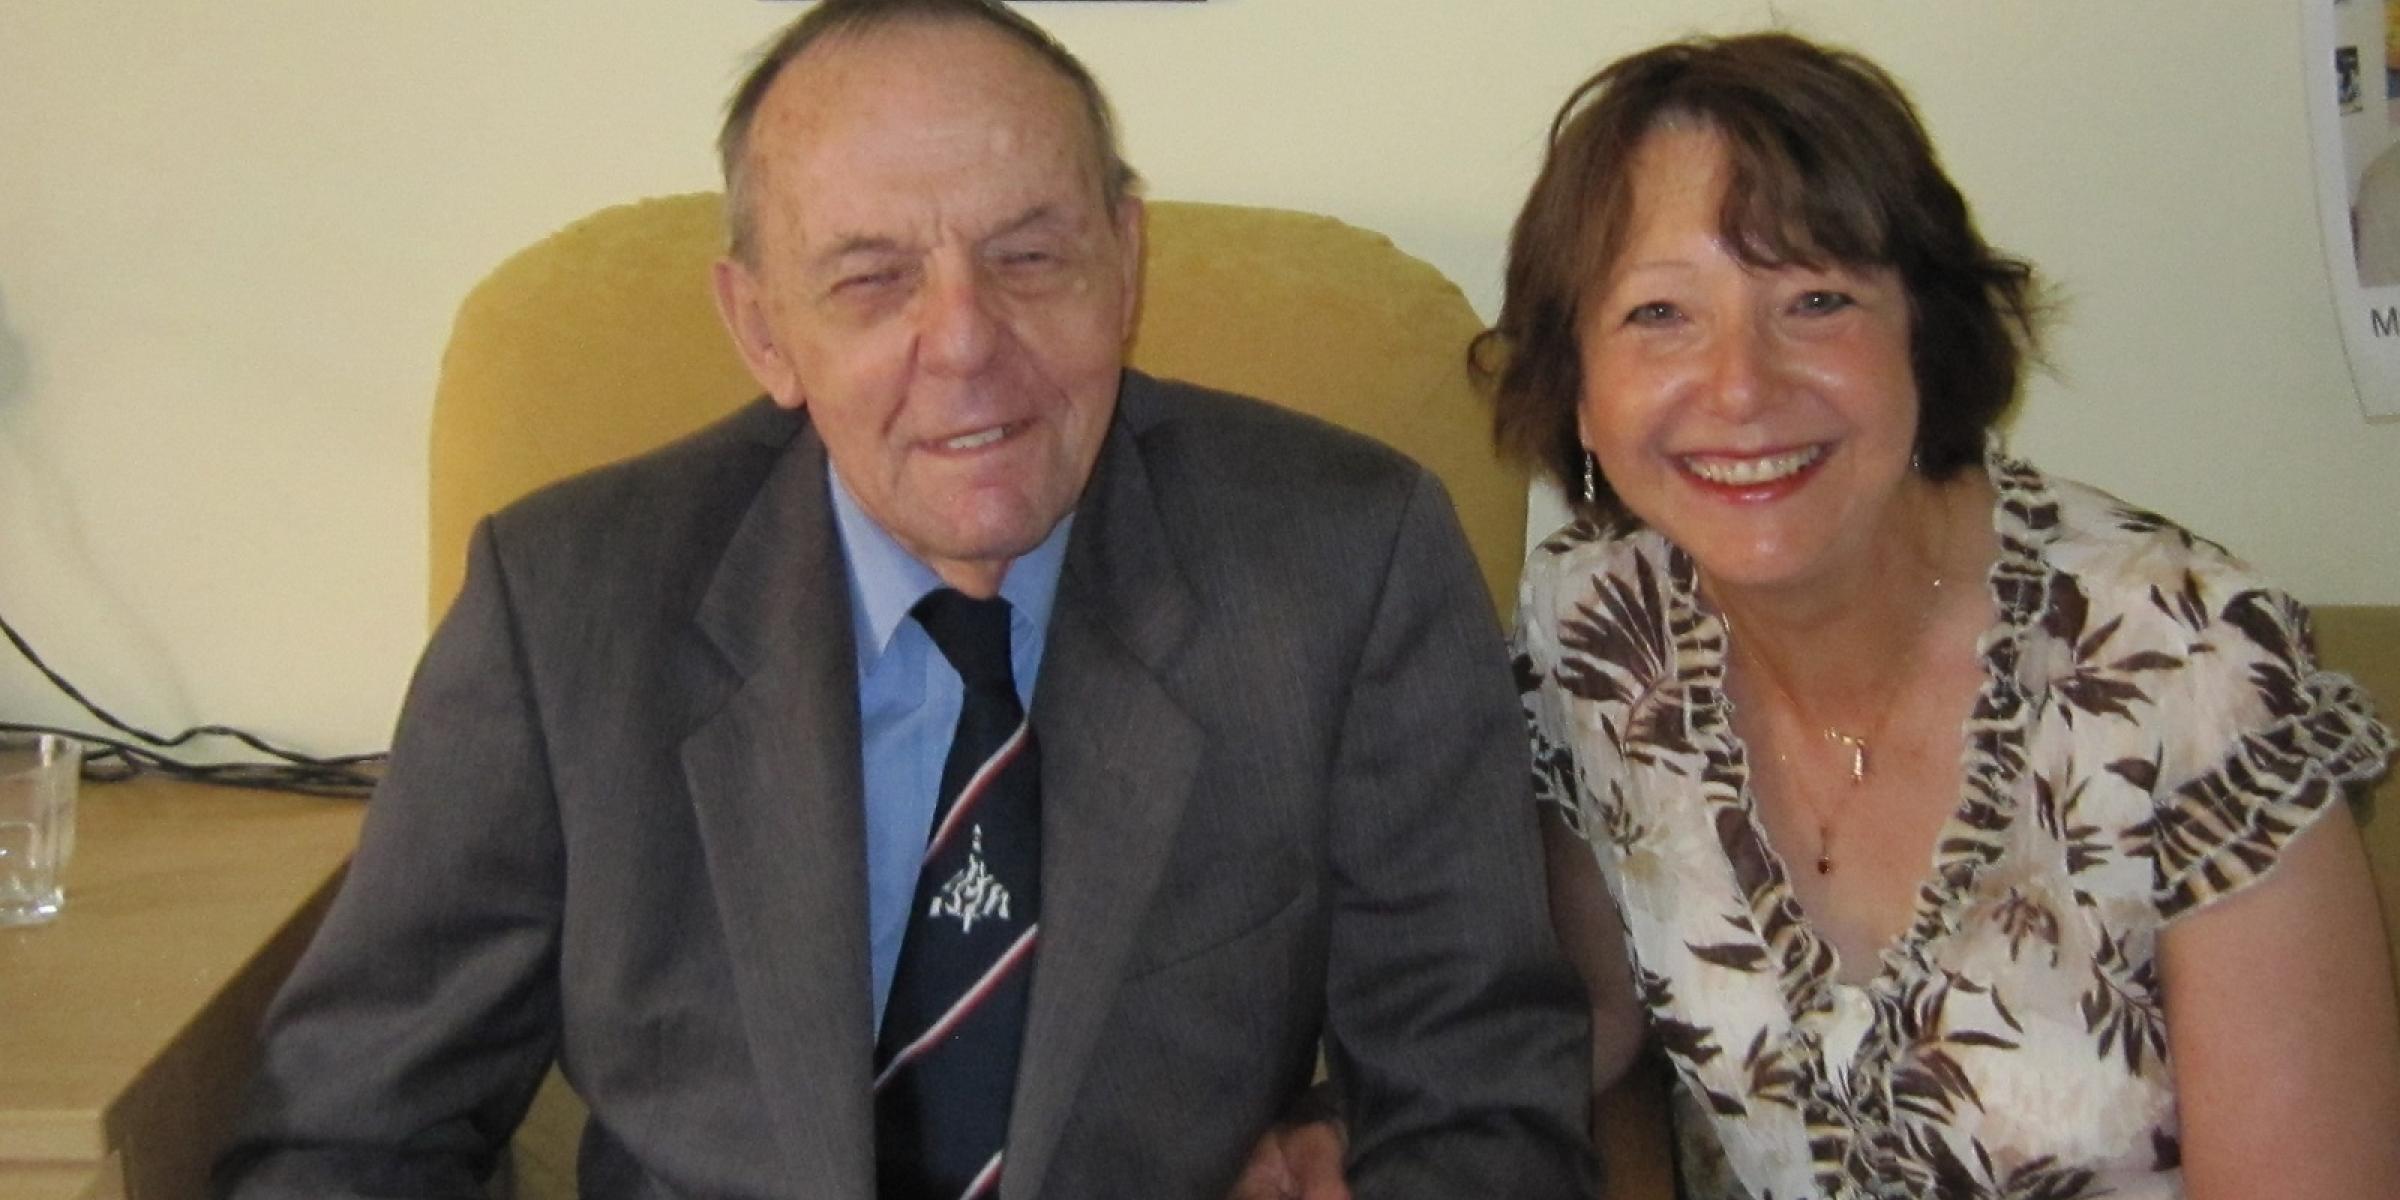 Lyn and her dad in the care home